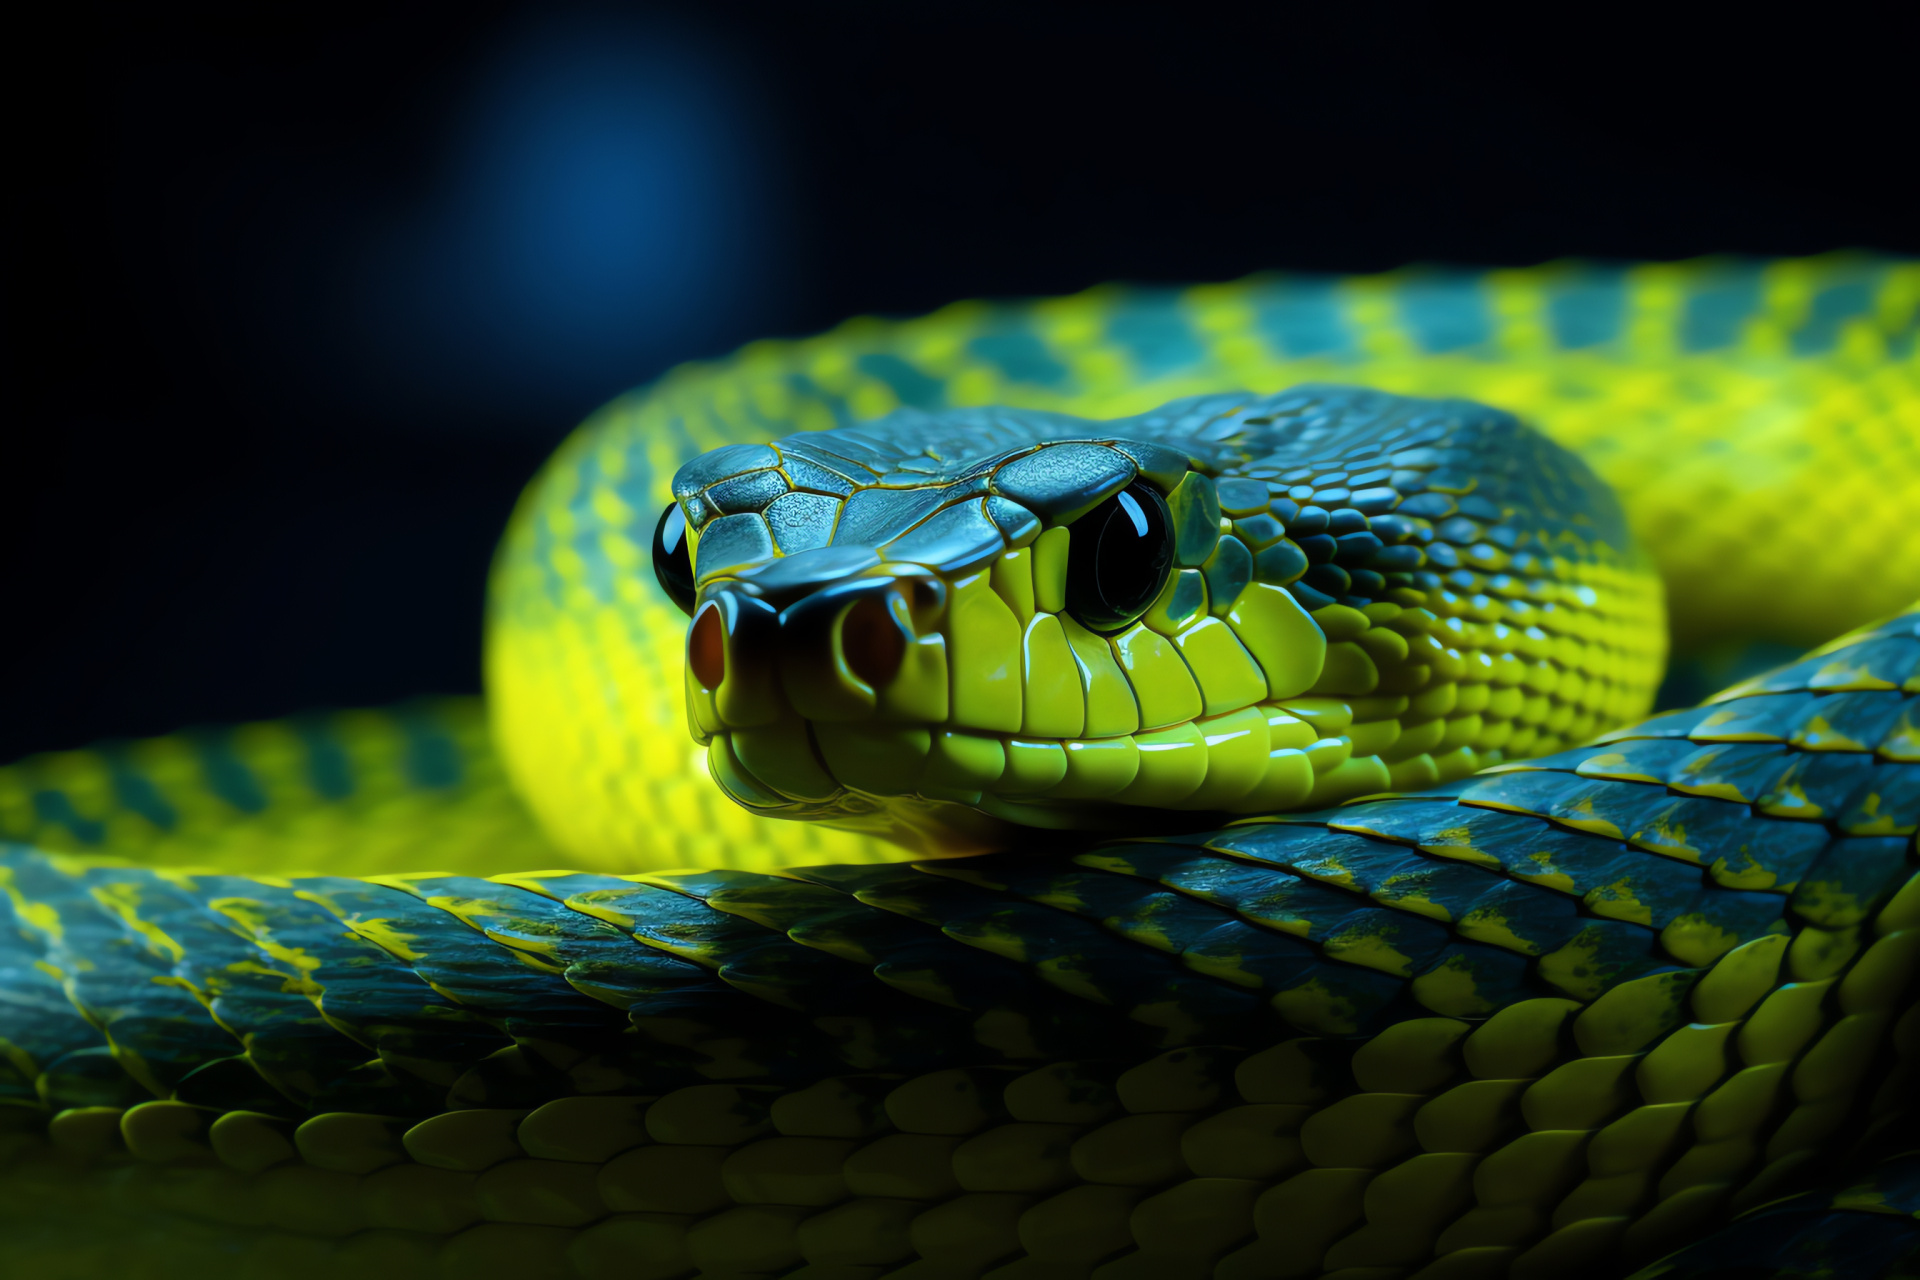 Vivid yellow serpent, Glistening reptile, Lively snake movement, Dramatic contrasting backdrop, Radiant serpentine beauty, HD Desktop Wallpaper